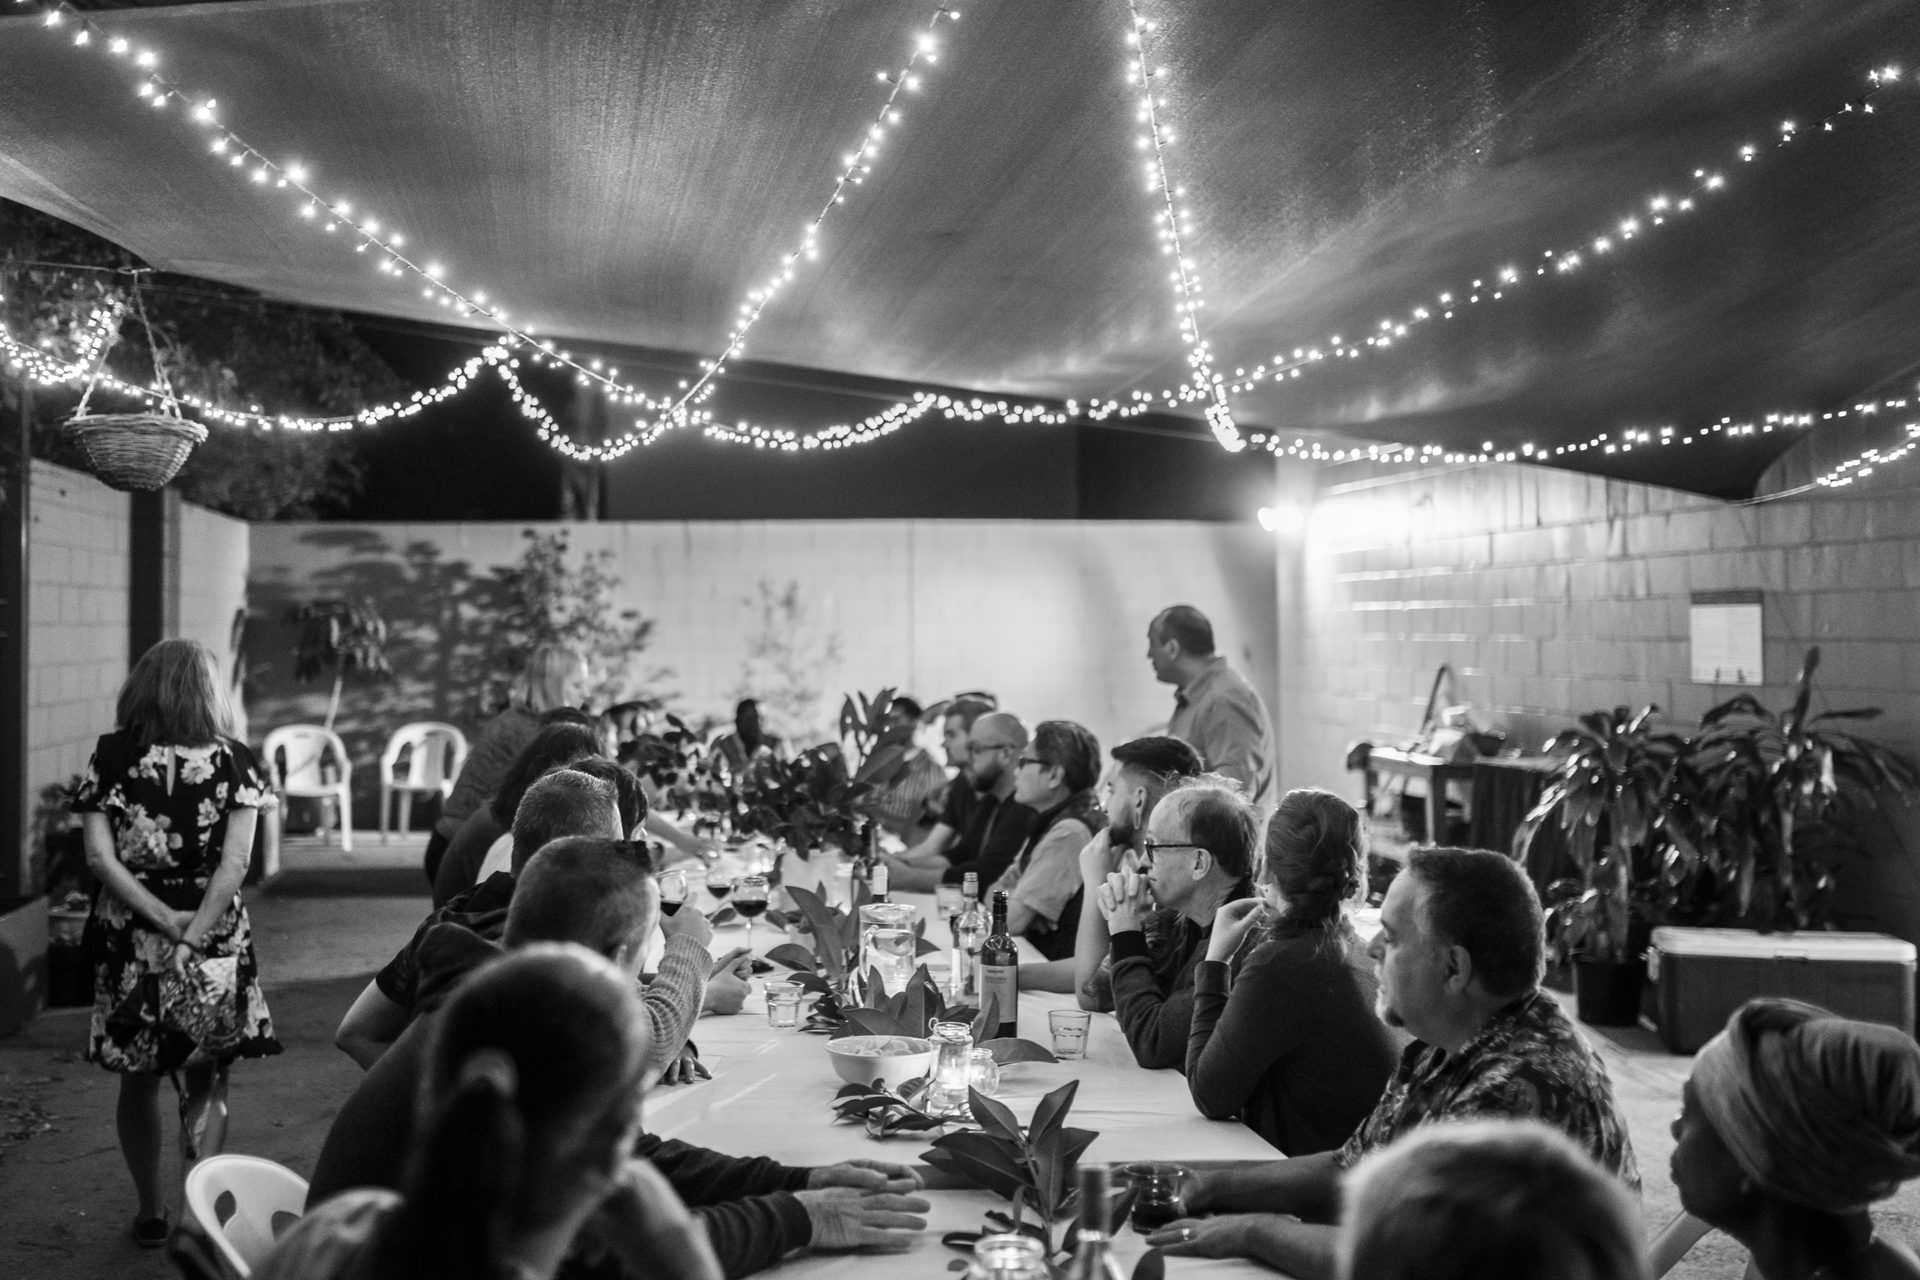 Social group, Photograph, White, Black, Table, Black-and-white, Style, Tableware, Suit, Crowd